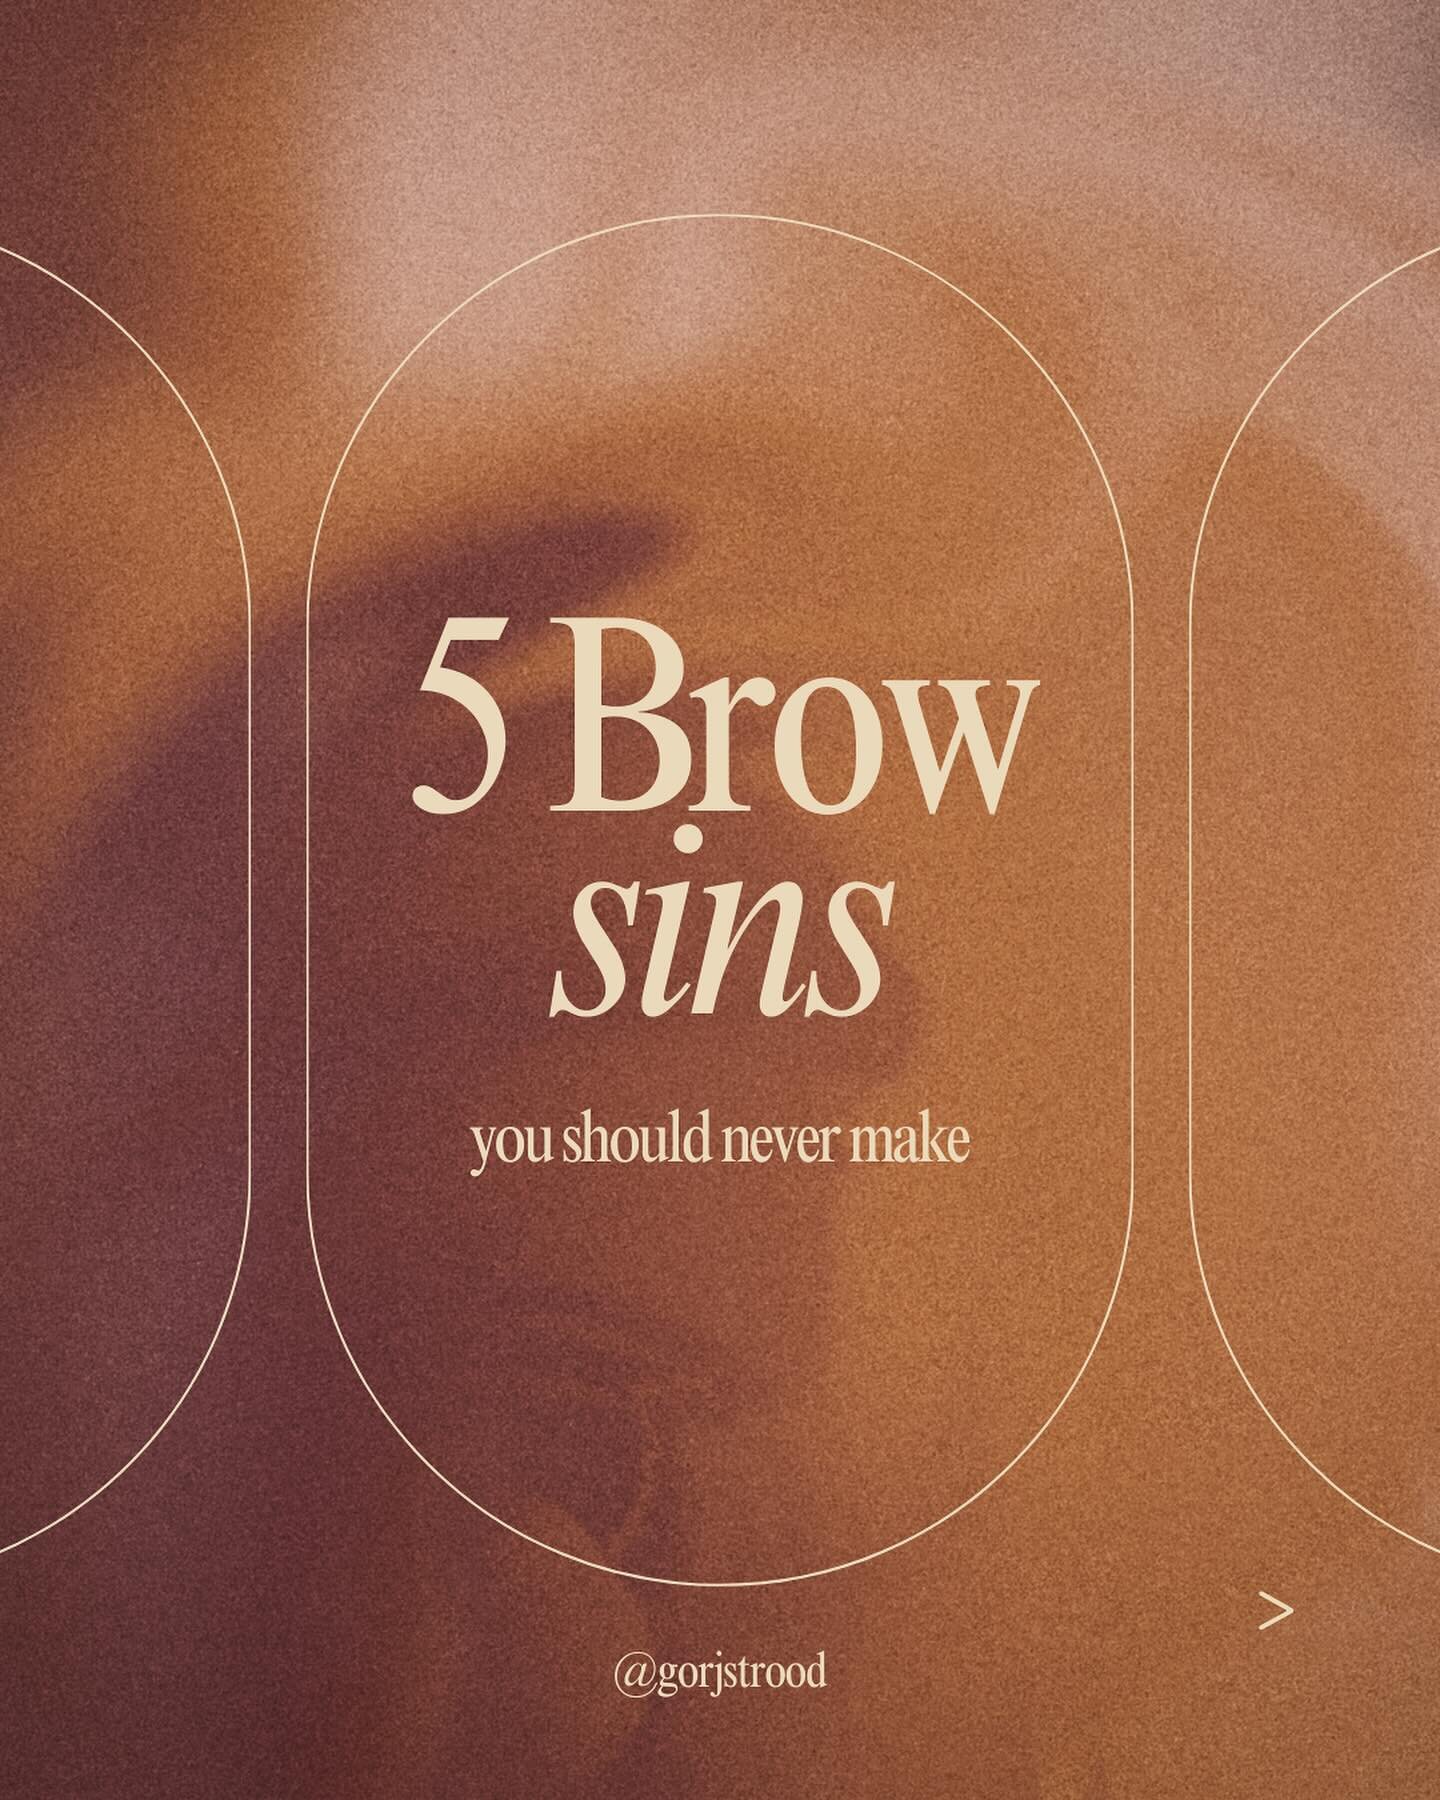 5 brow sins you should never make ✨

1. Over plucking your brows
2. Sleeping in your brow makeup
3. Applying too many products all at once
4. Not moisturising the skin around the brows
5. Not applying castor oil regulary

#GorjSecrets #ConfessYourBro